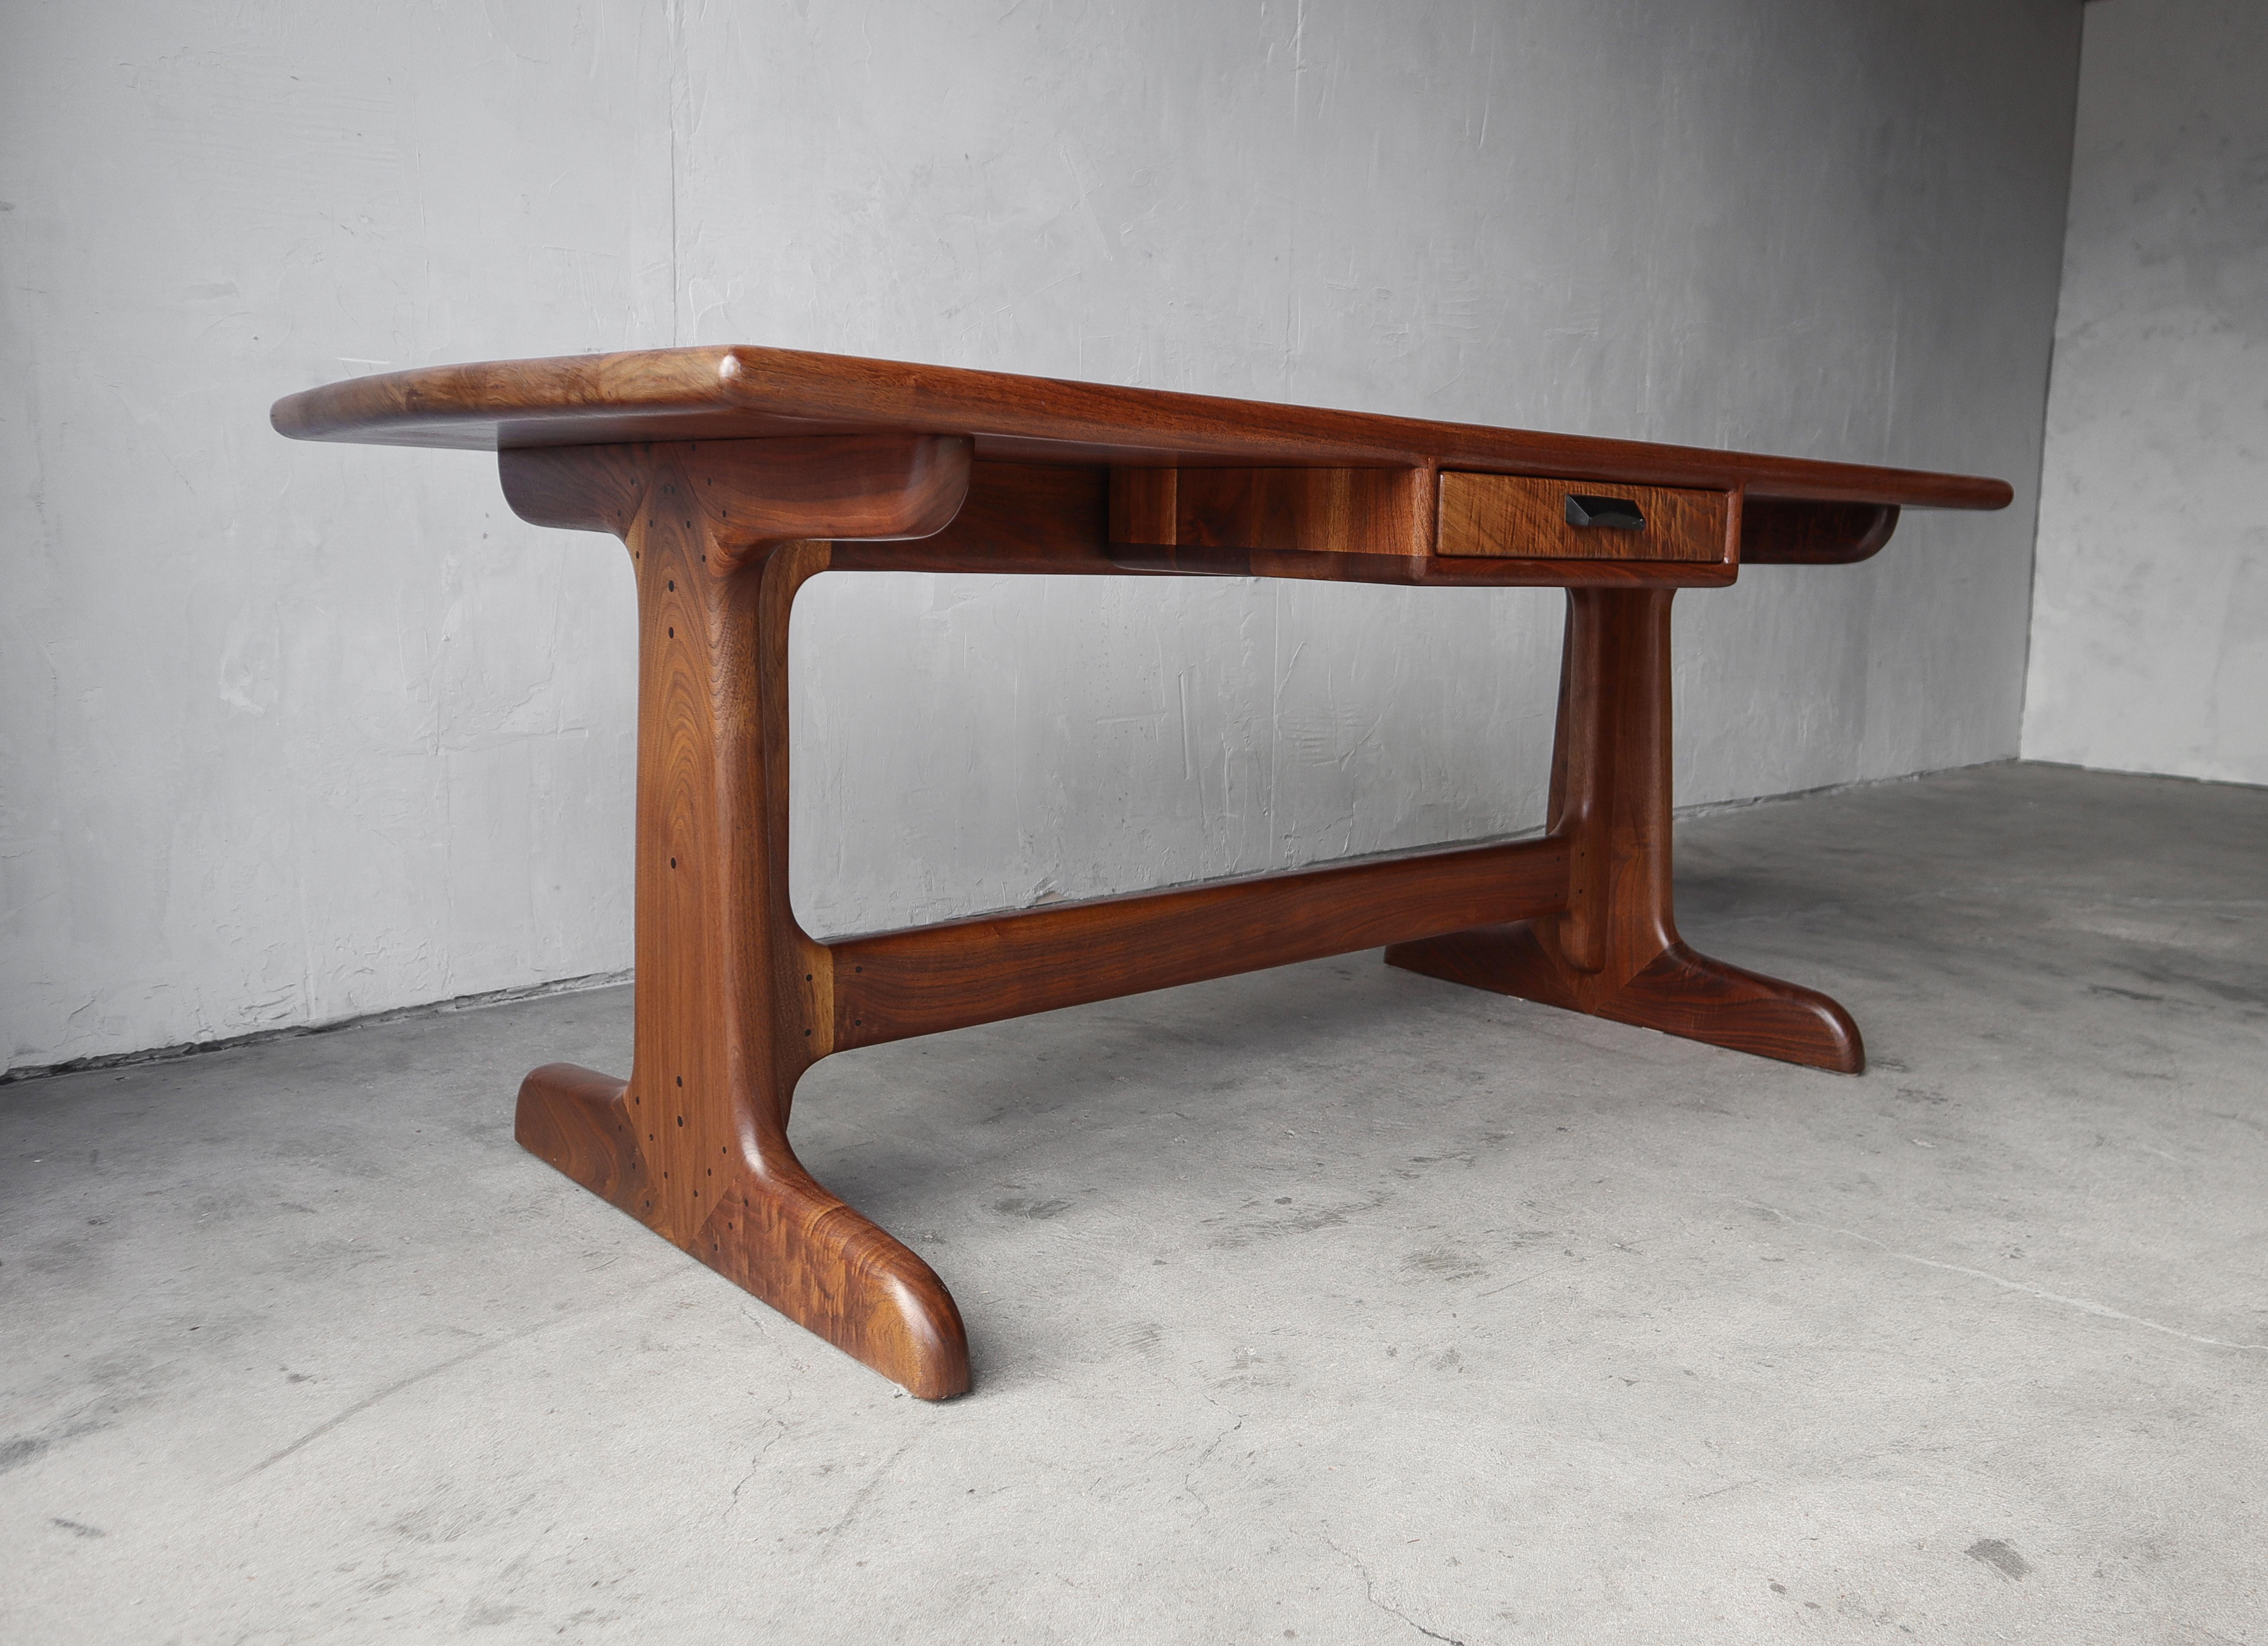 This beautiful Studio Craft partners desk is incredible. NO detail was overlooked in the making of this stunning piece, sculpted entirely of heavily grained, solid walnut, finished expertly, with seamless transitions and expert joinery.  The desk